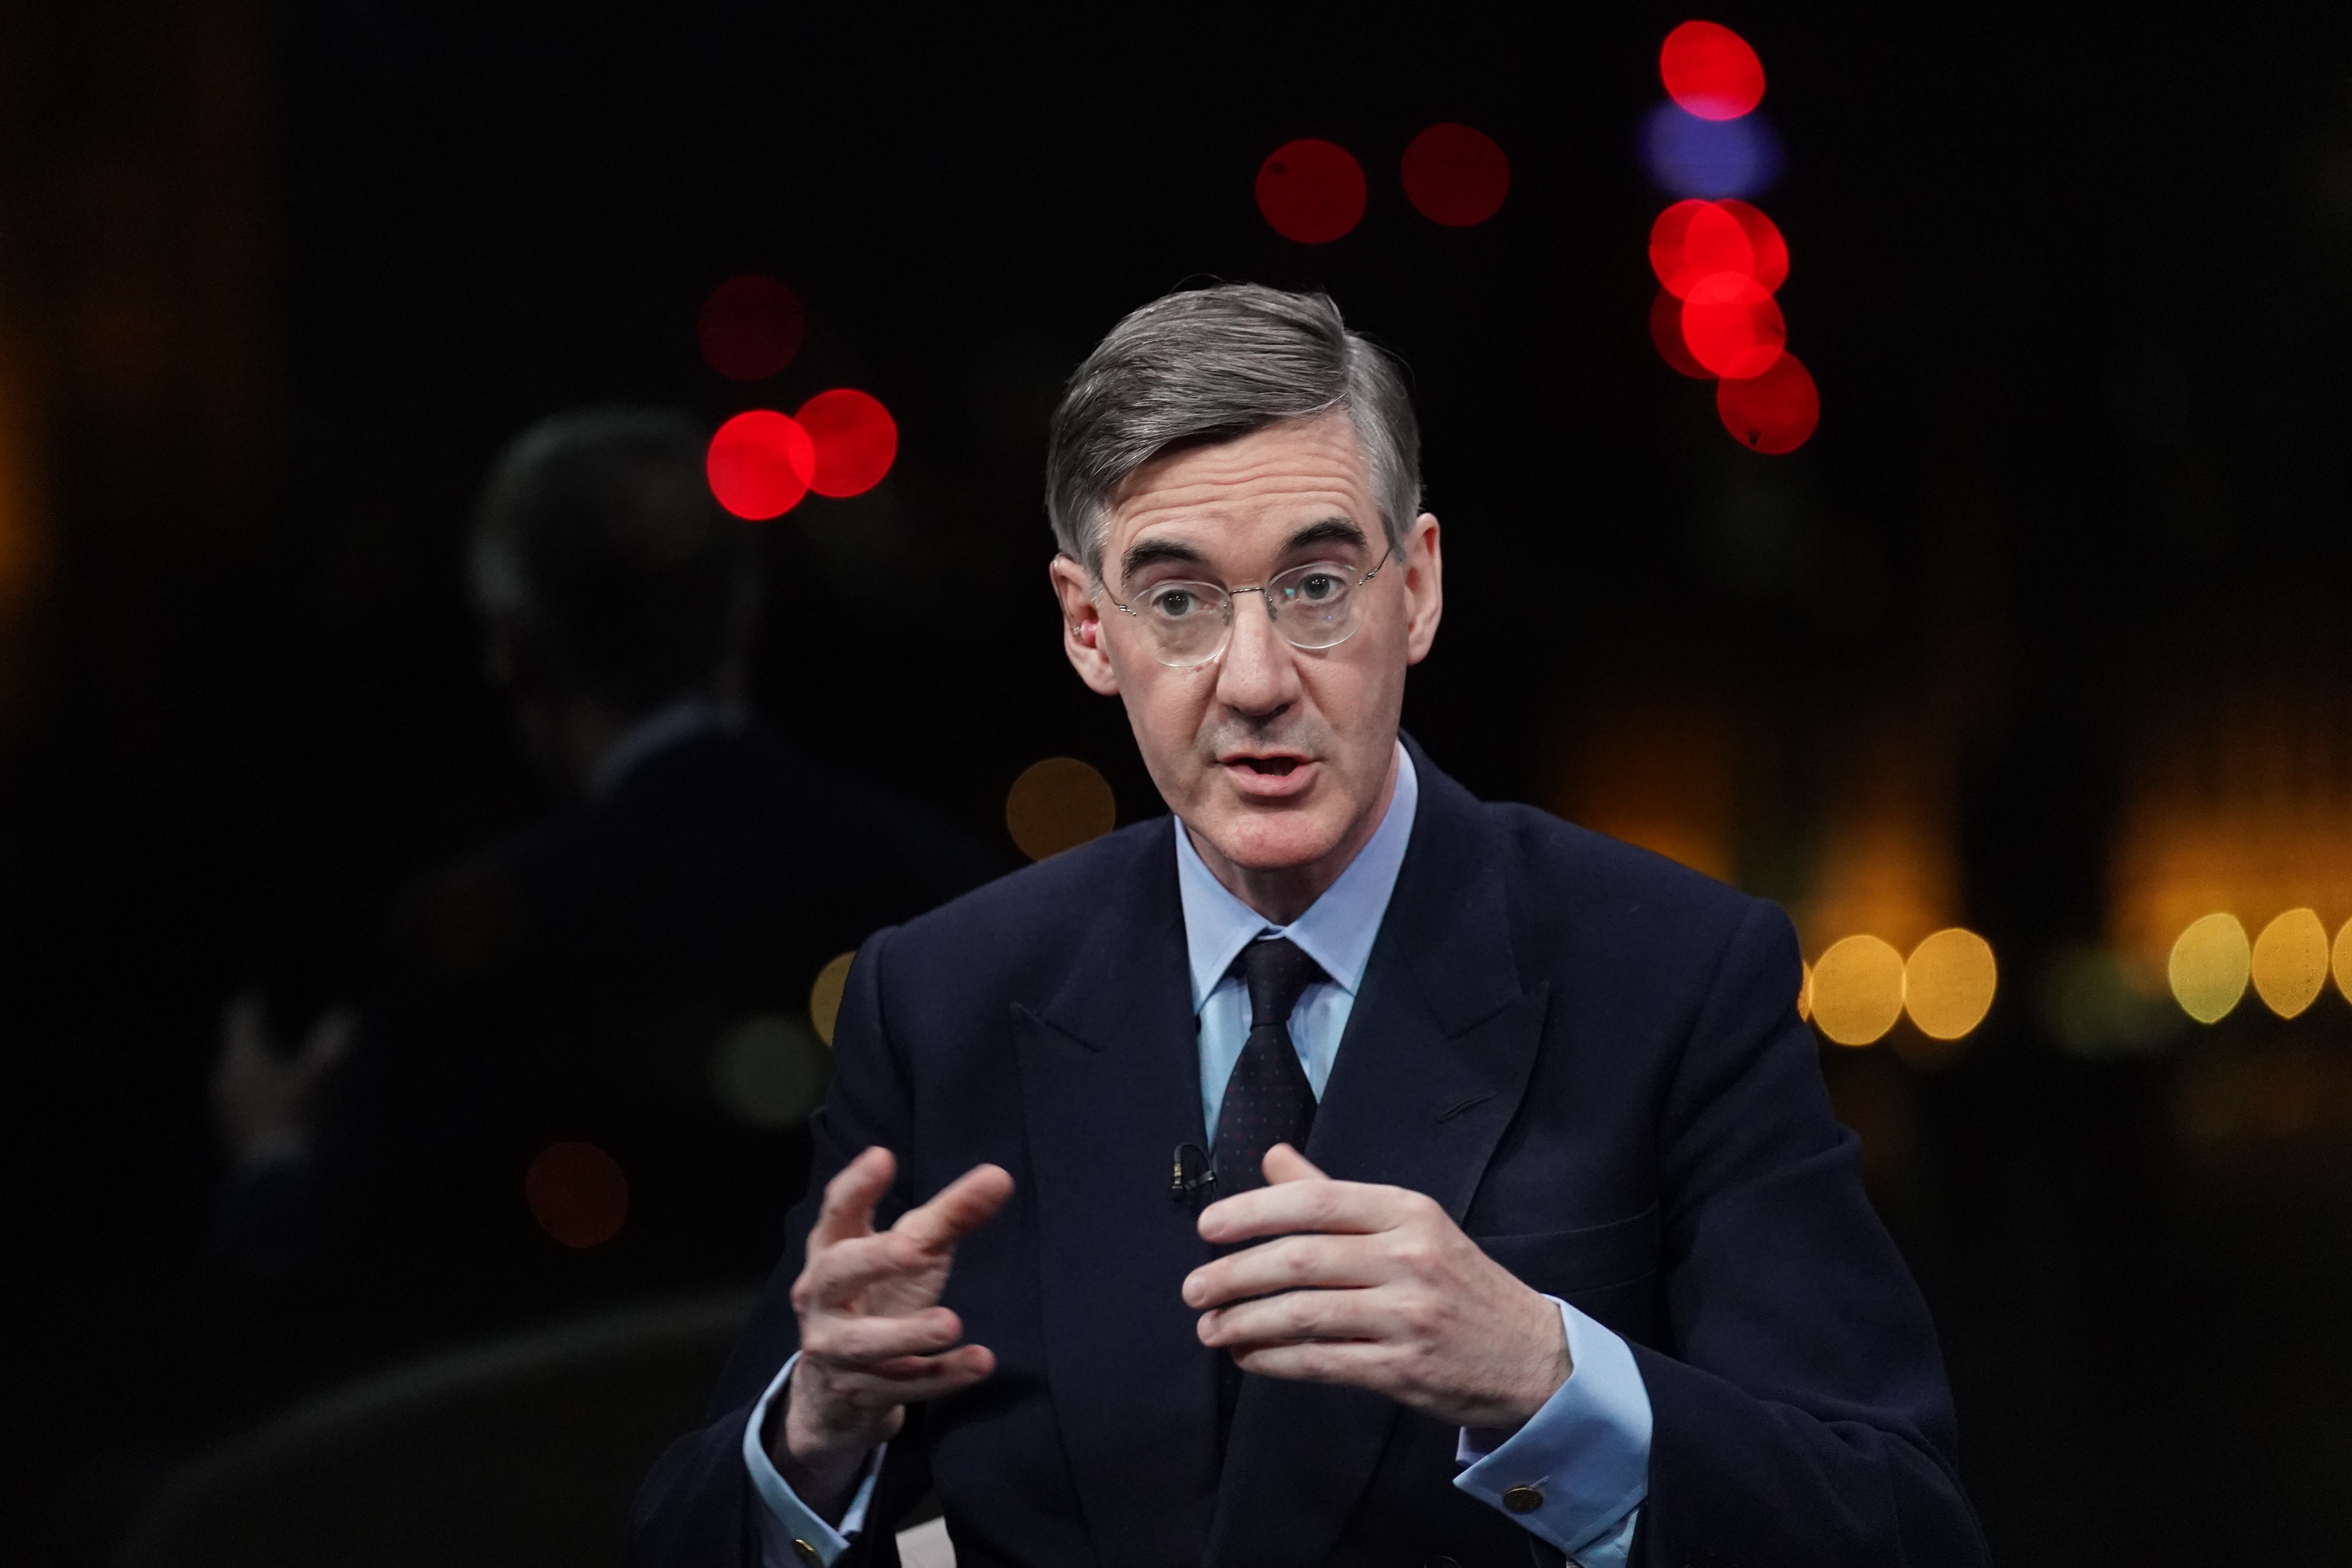 Jacob Rees-Mogg criticised the decision to ditch a post-Brexit “bonfire” of remaining EU-era laws